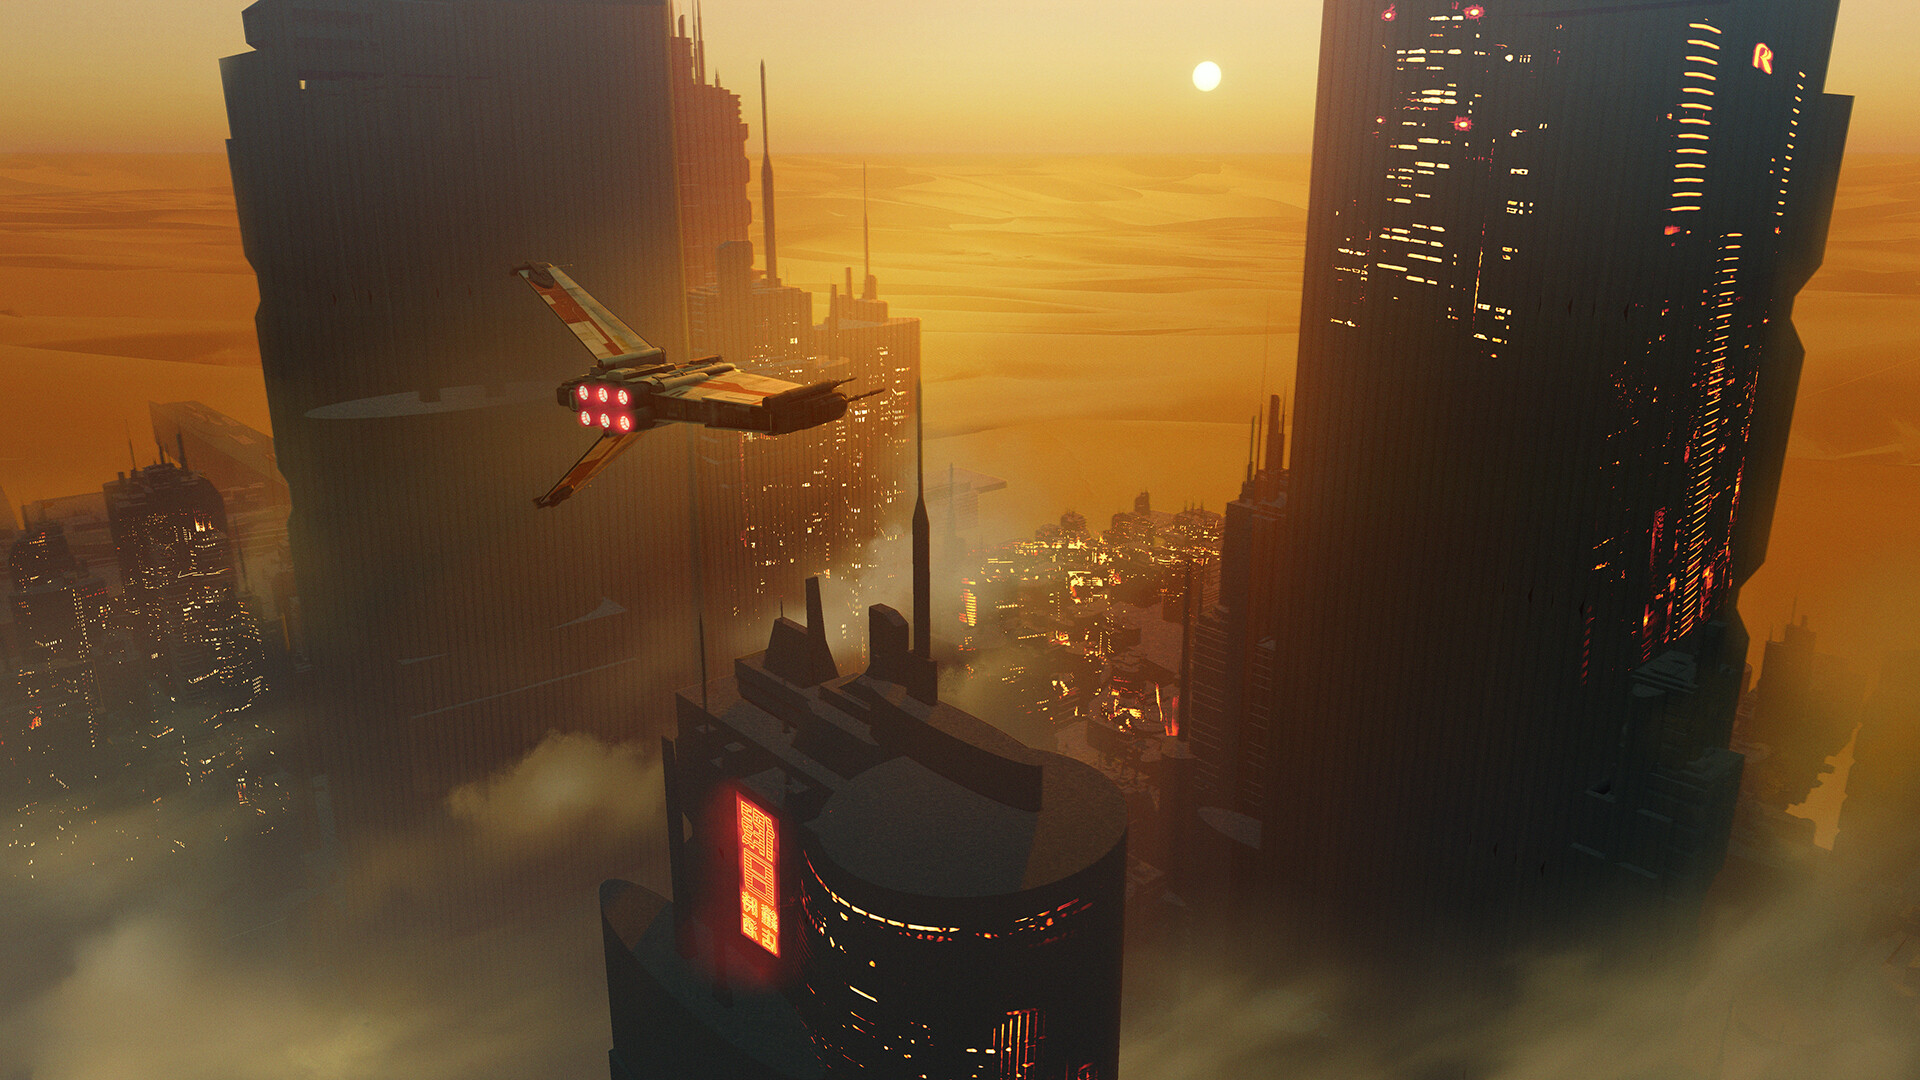 art of a ship gliding by some tall buildings, with a desert in the background